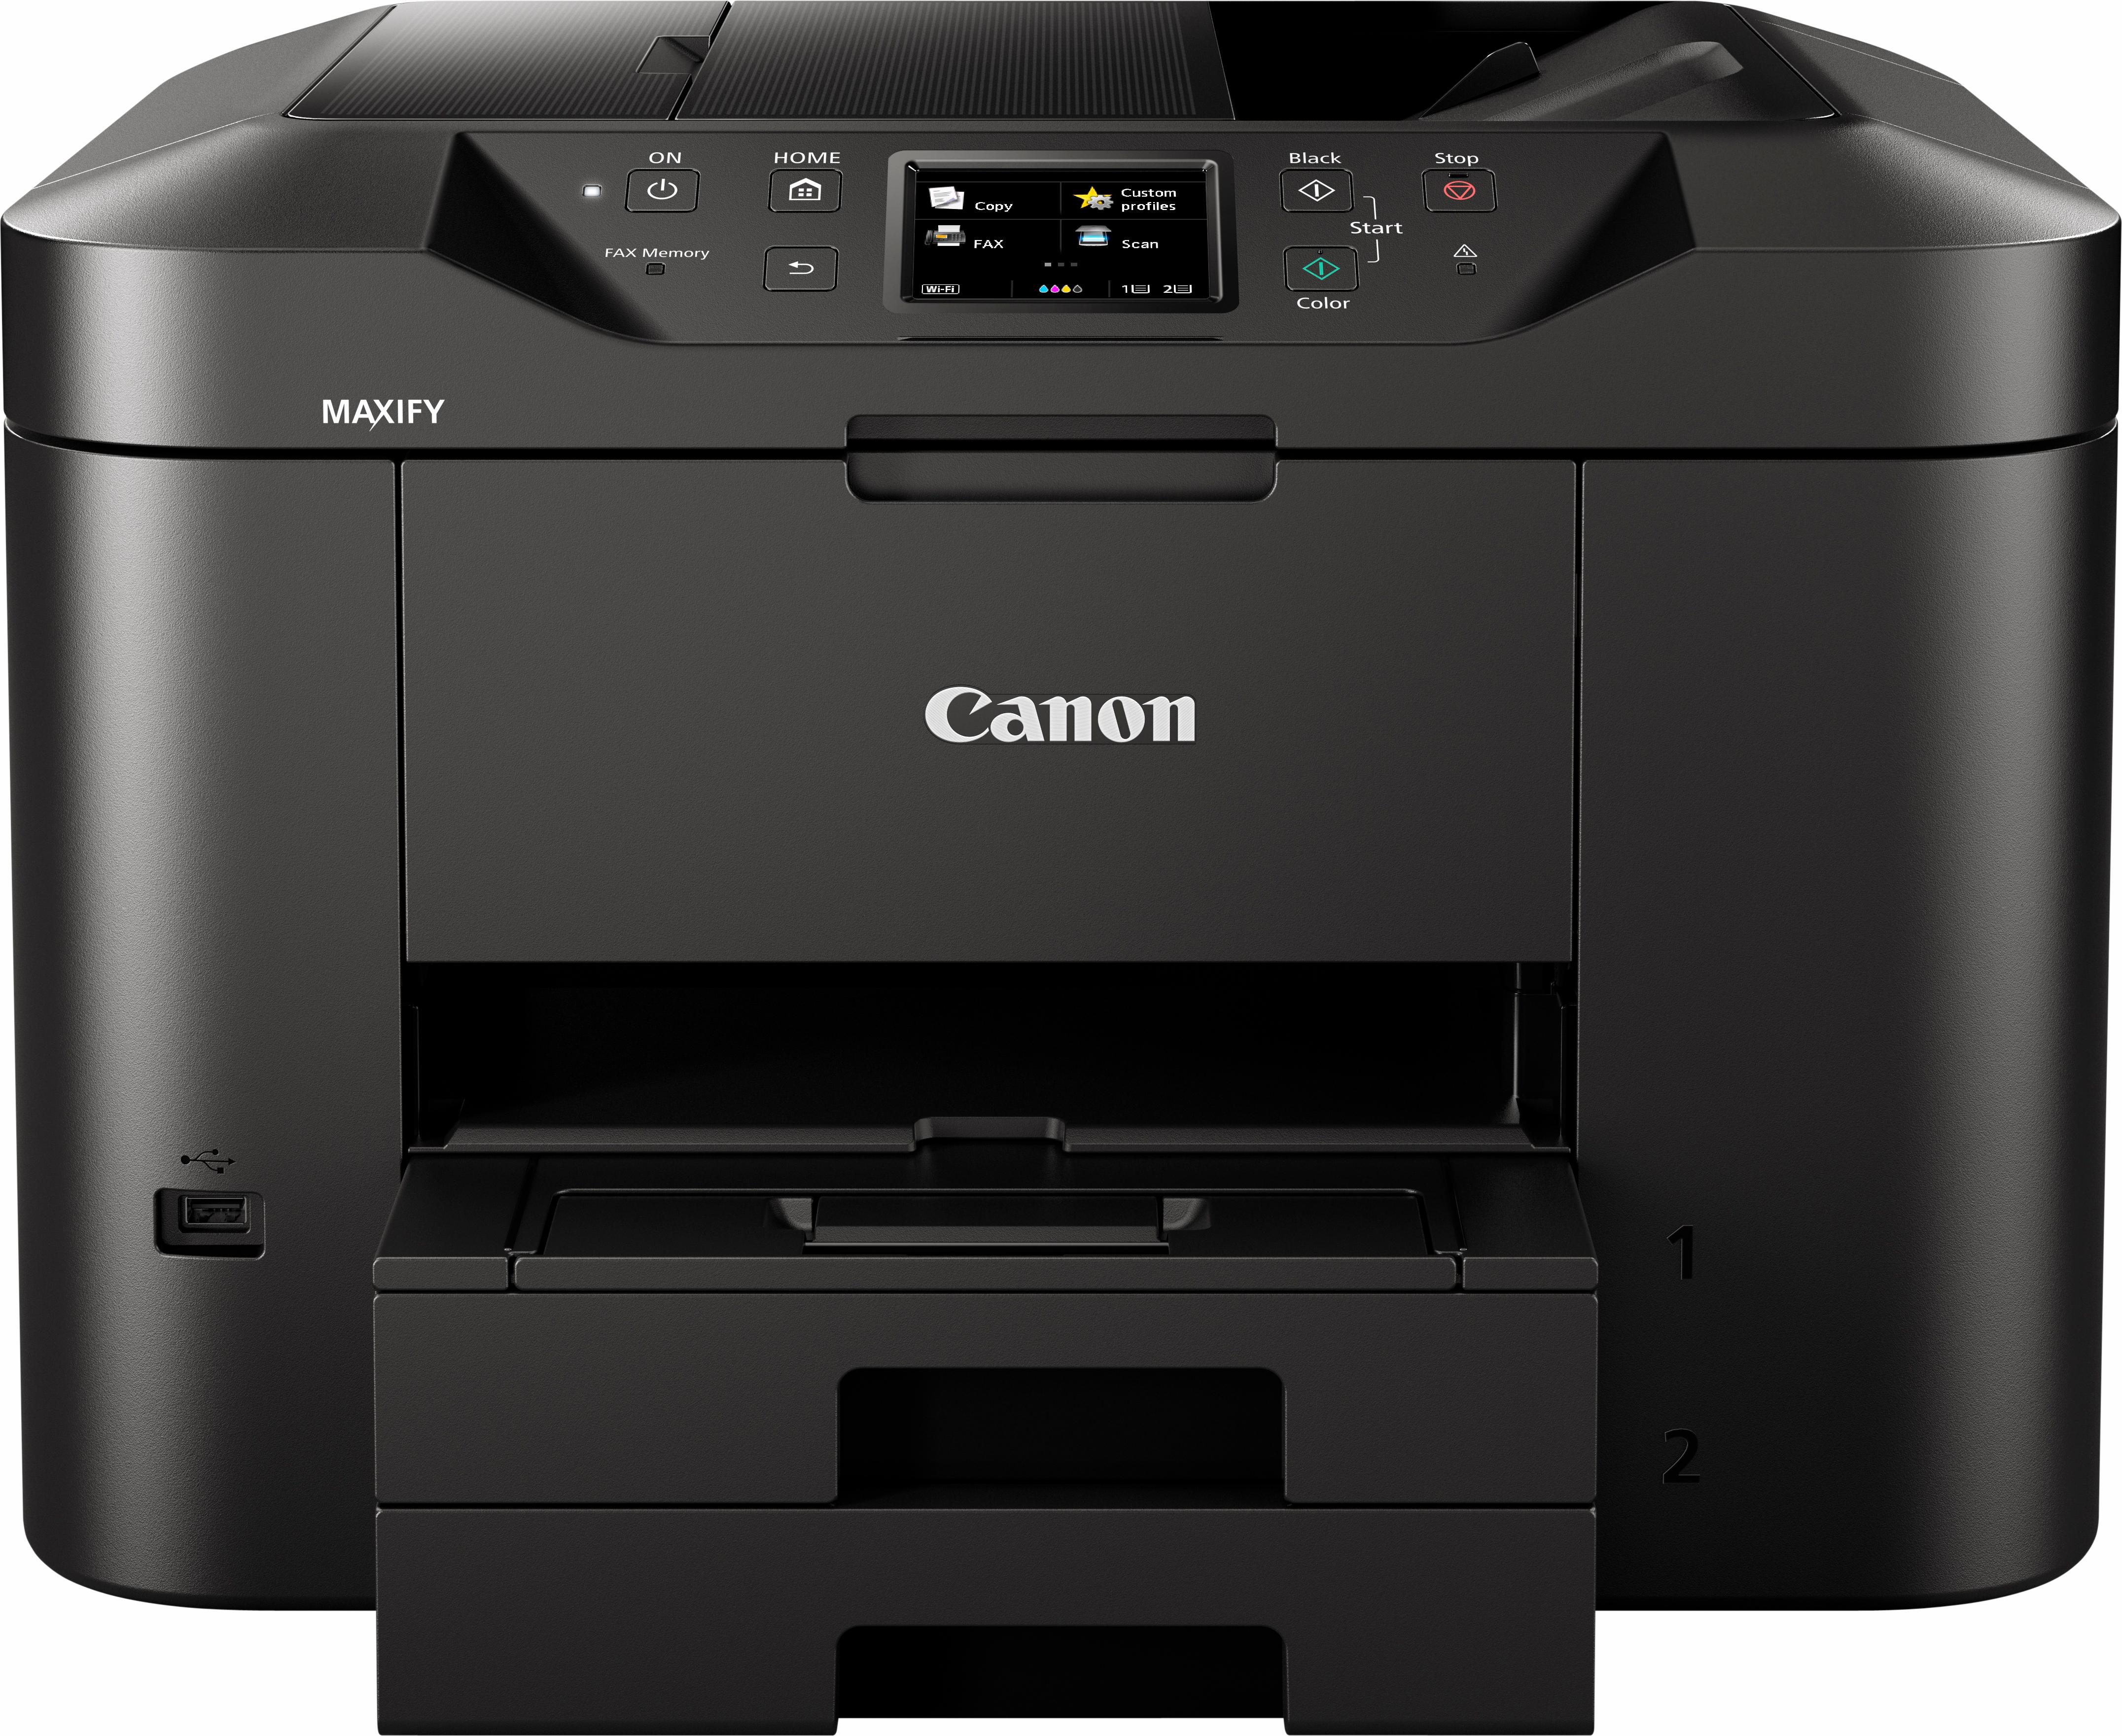 Canon Canon MAXIFY MB2750 multifunctioneel systeem 4-in-1 (0958C026)